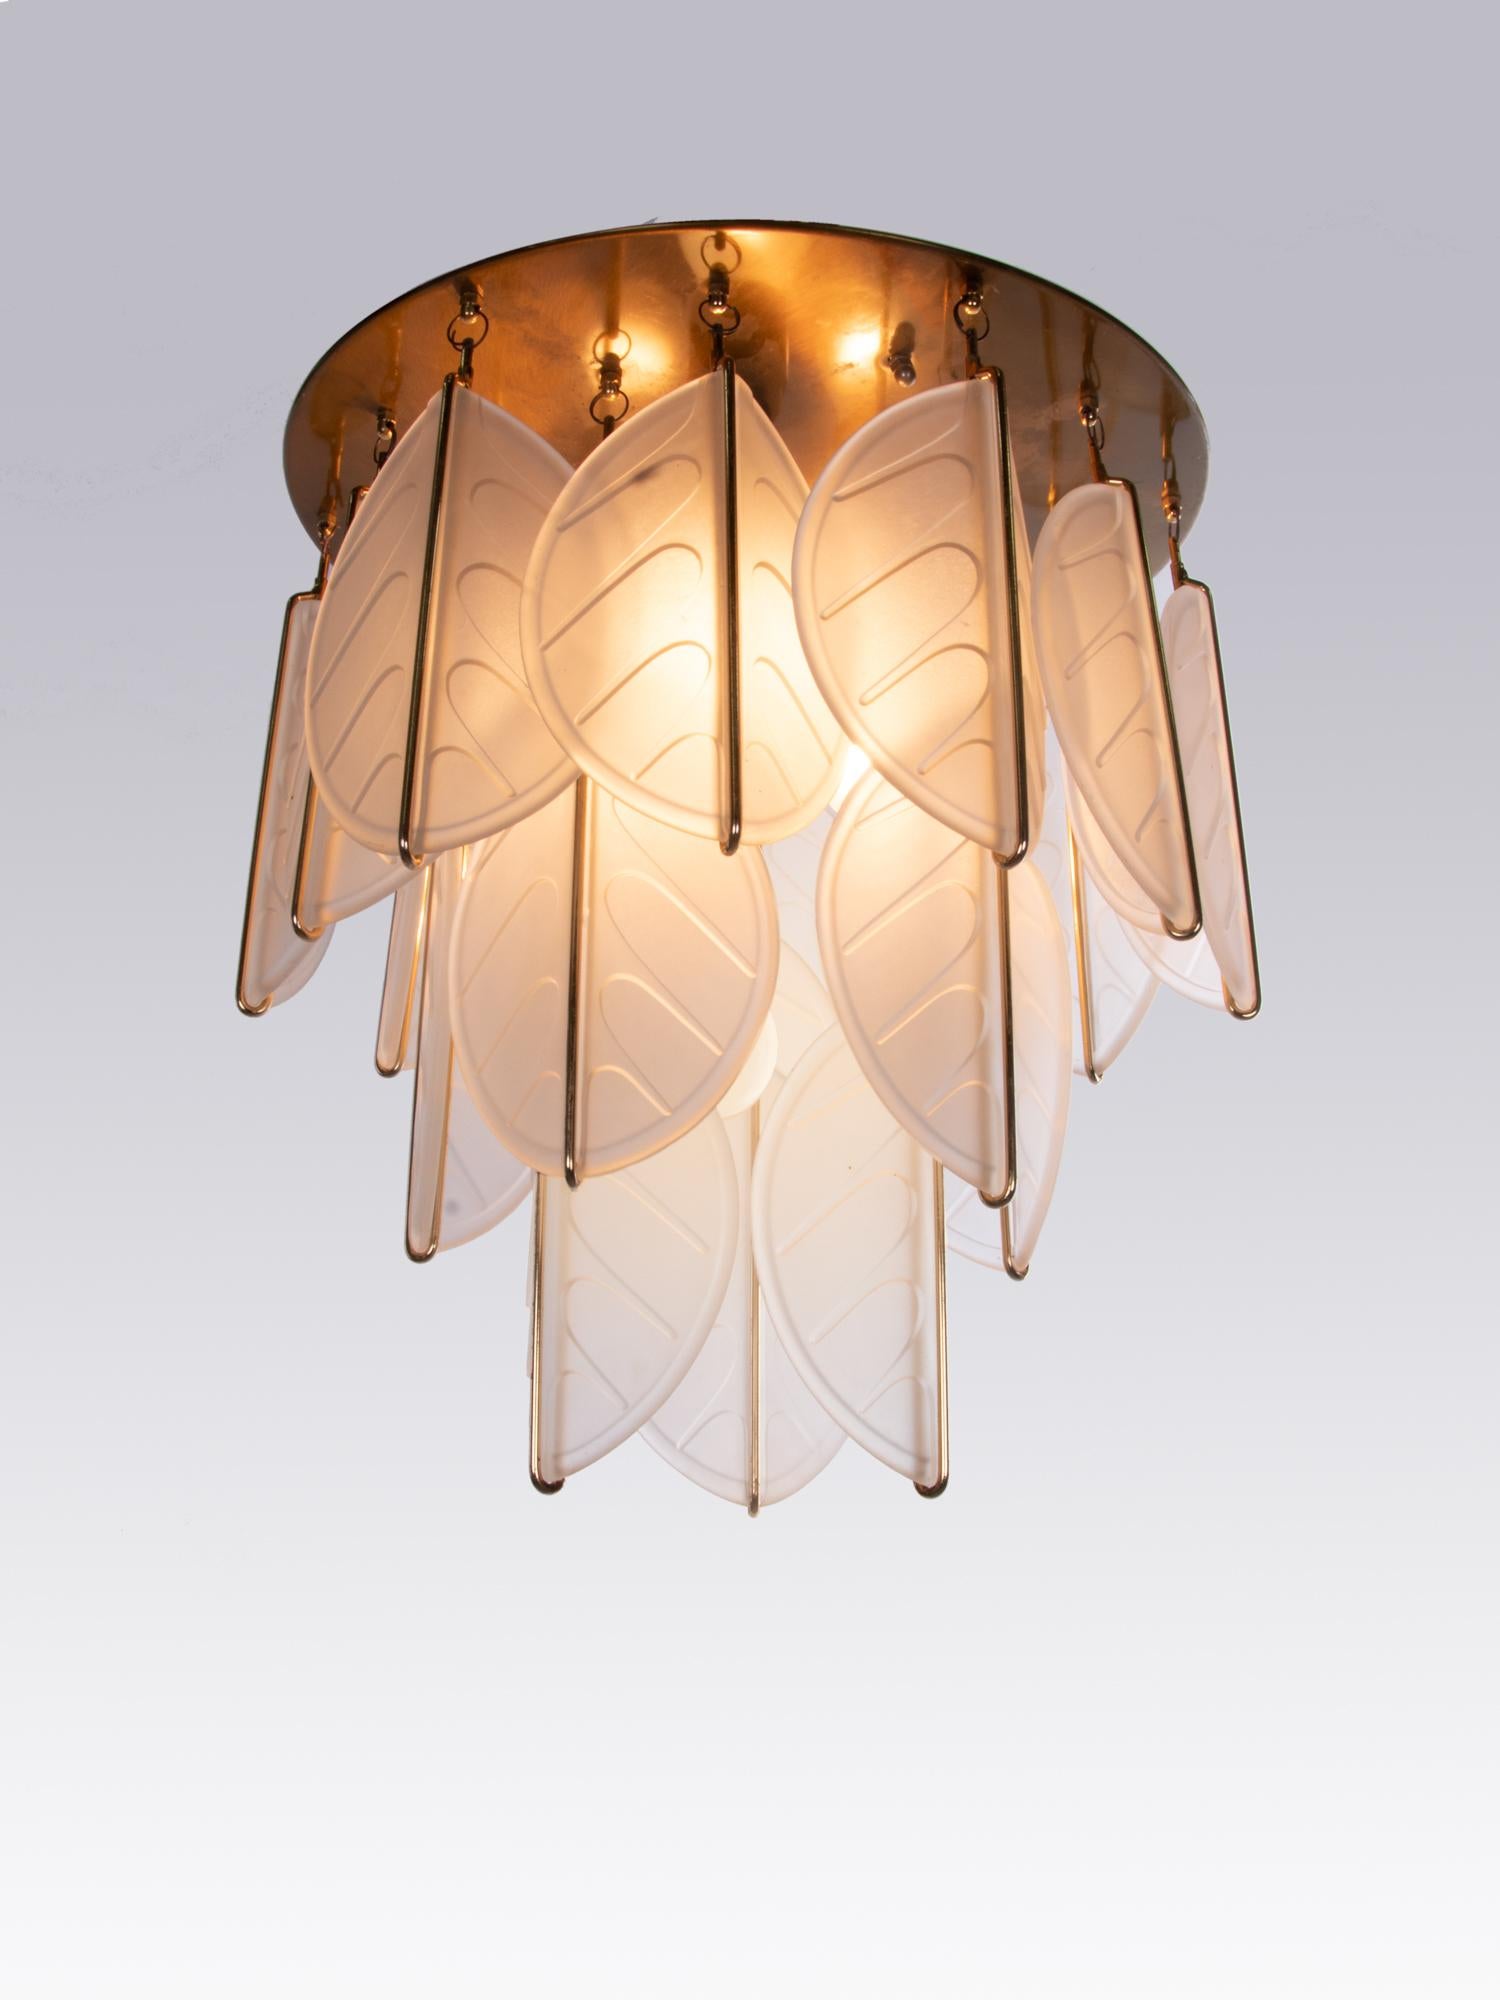 Elegant chandelier with glass leaves hanging on a brass frame. Manufactured in Italy in the 1970s. 

Measures: d 15.75